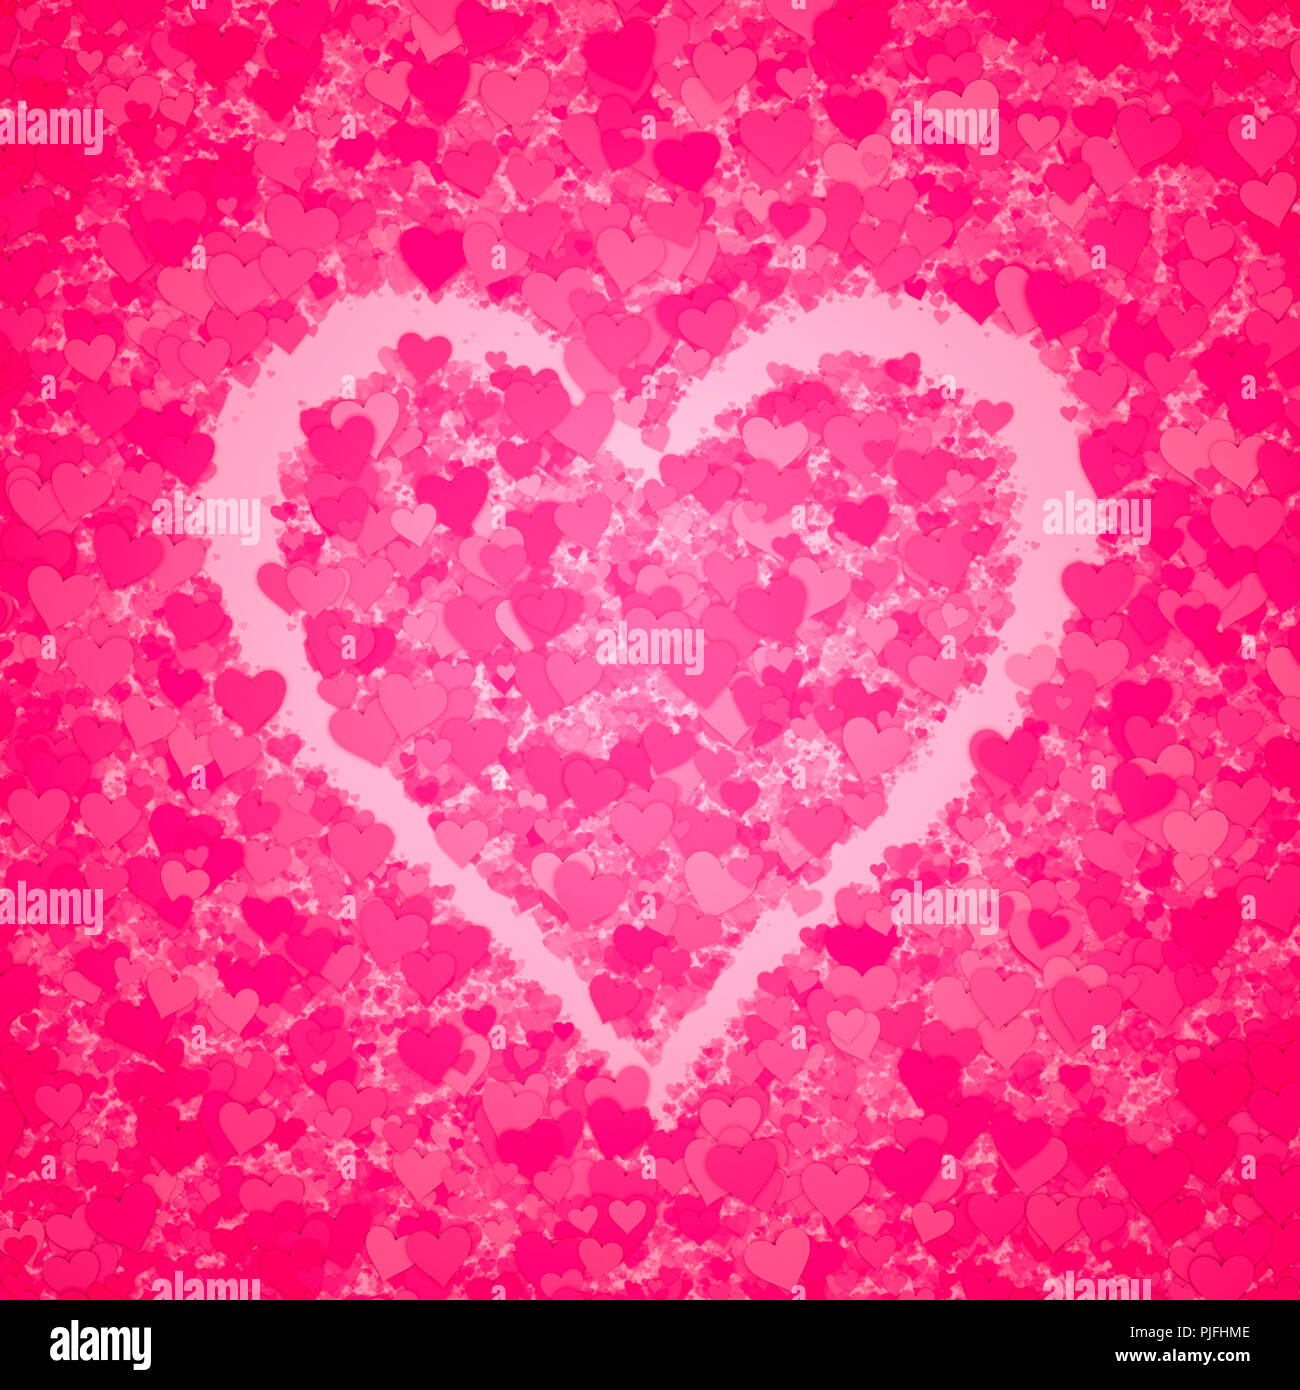 An image of a beautiful hearts background Stock Photo